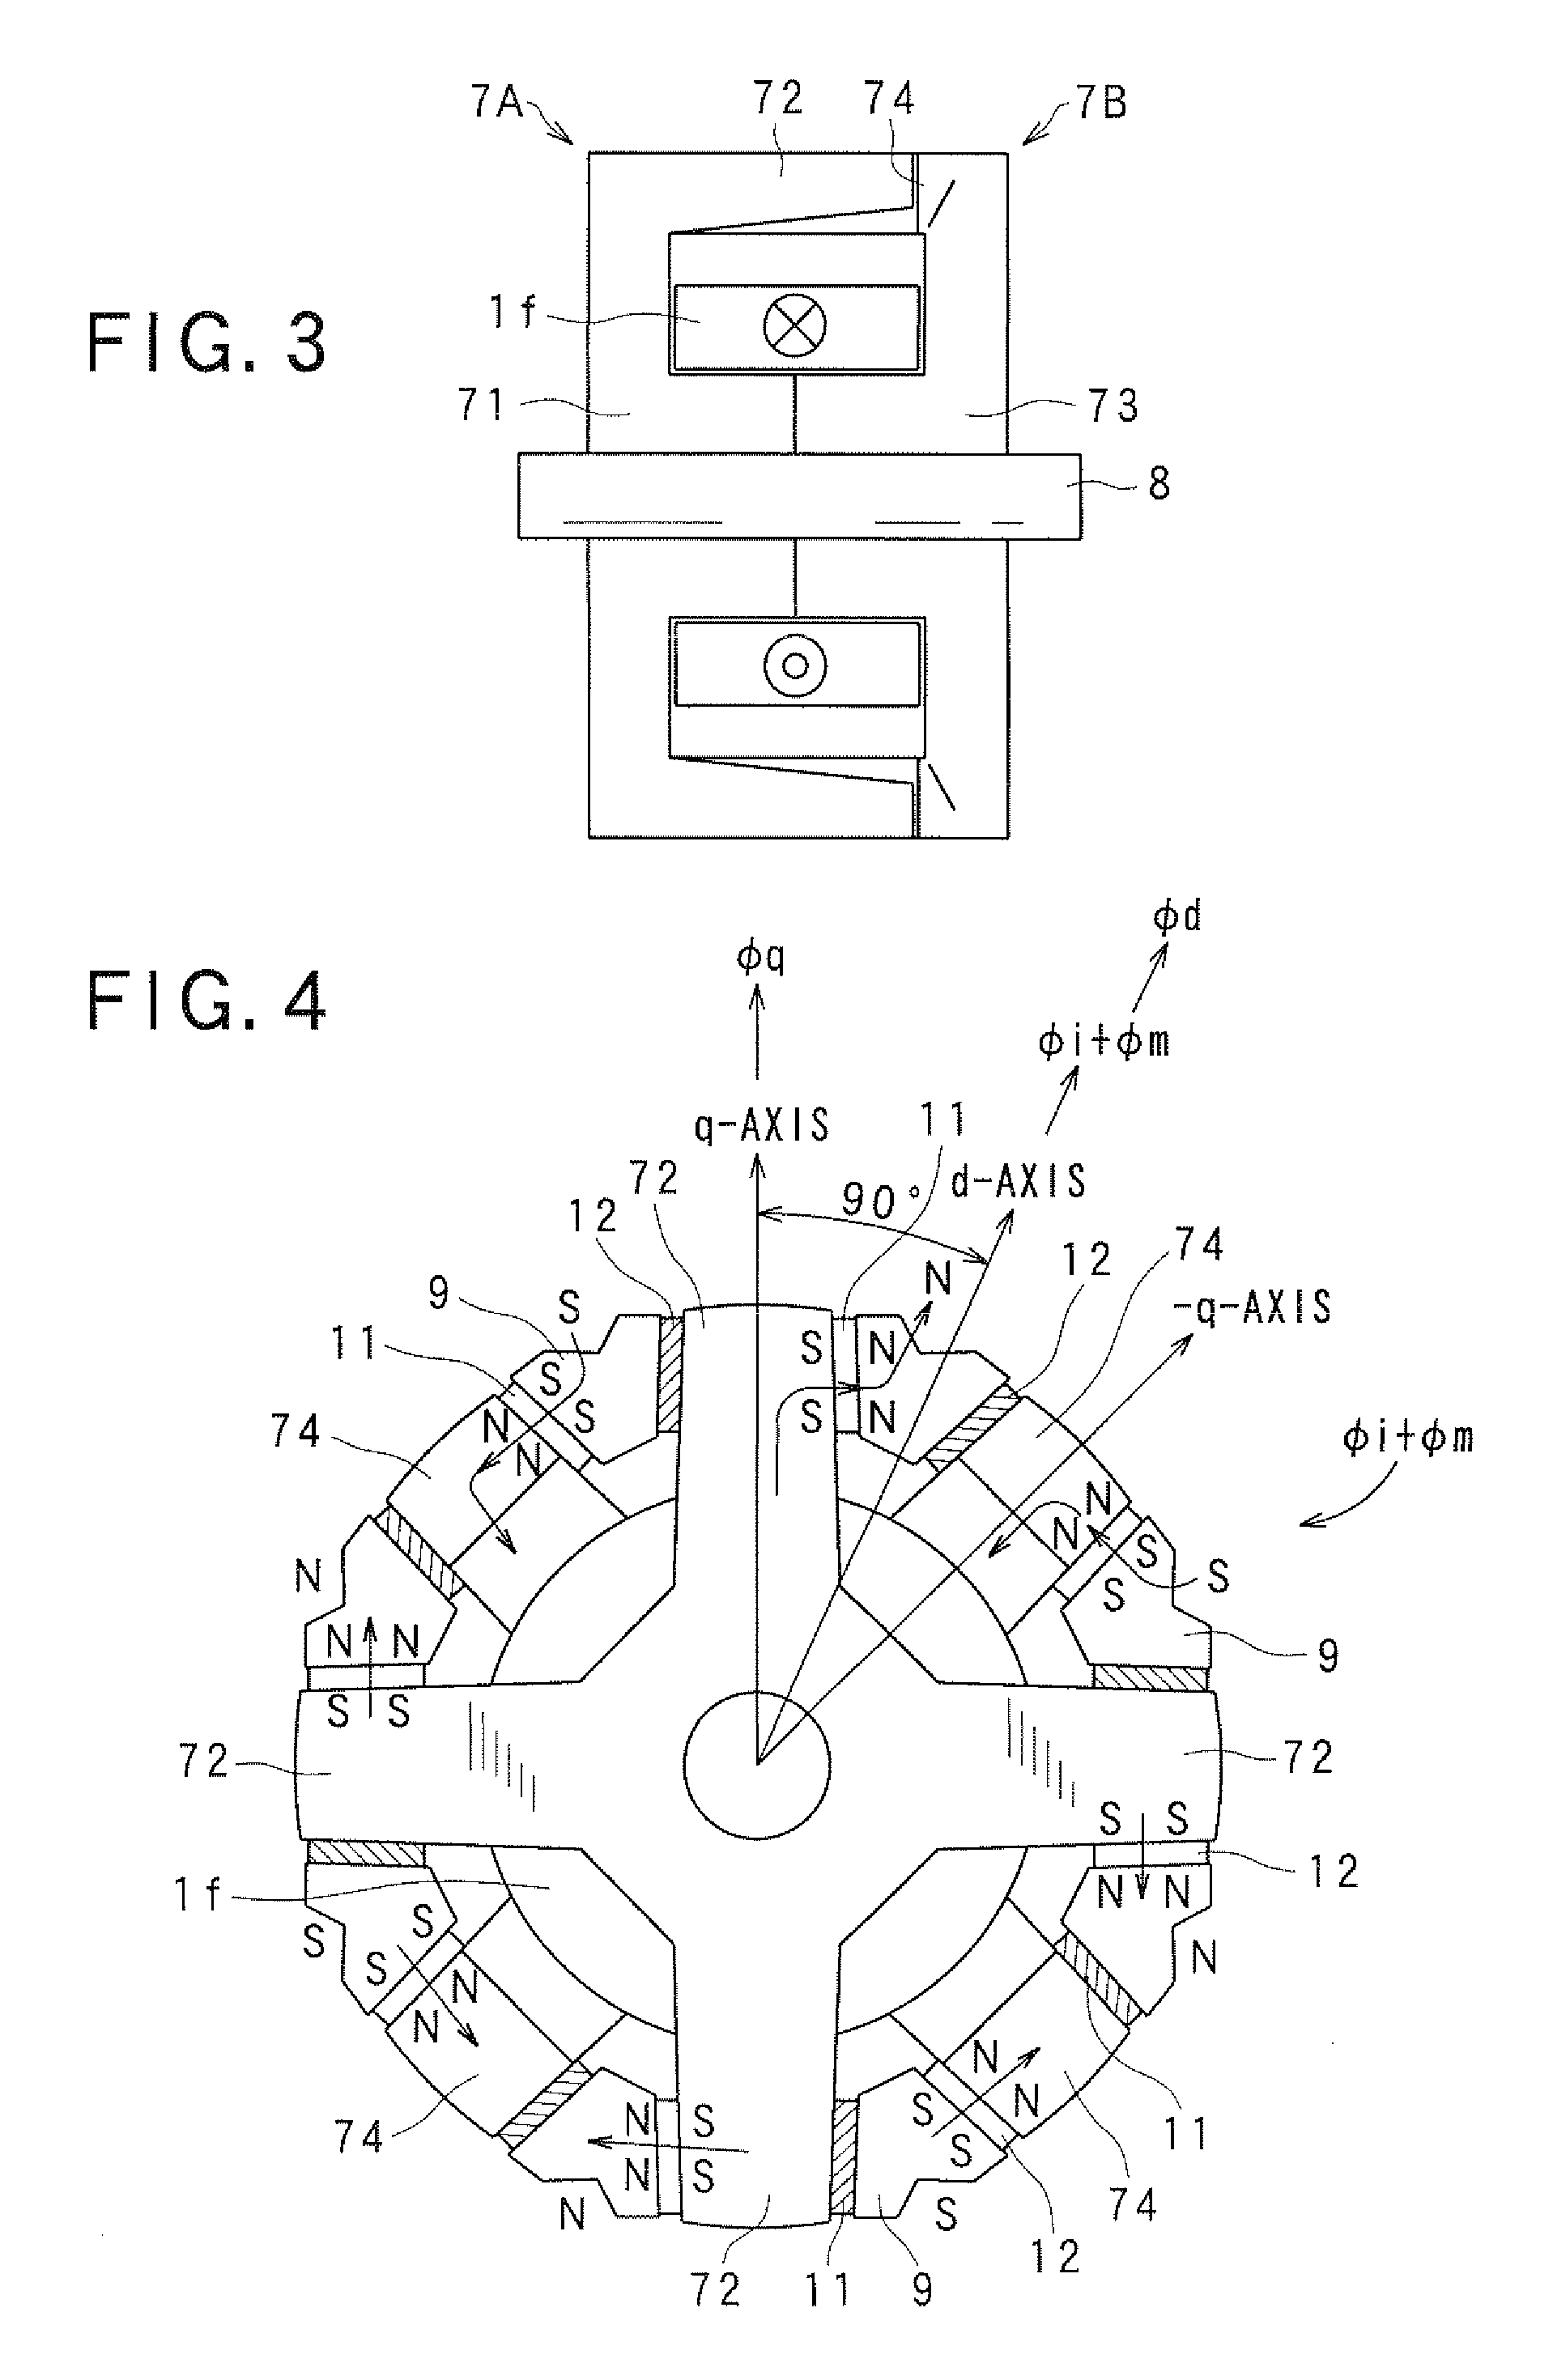 Motor apparatus including lundell motor having lundell-type rotor